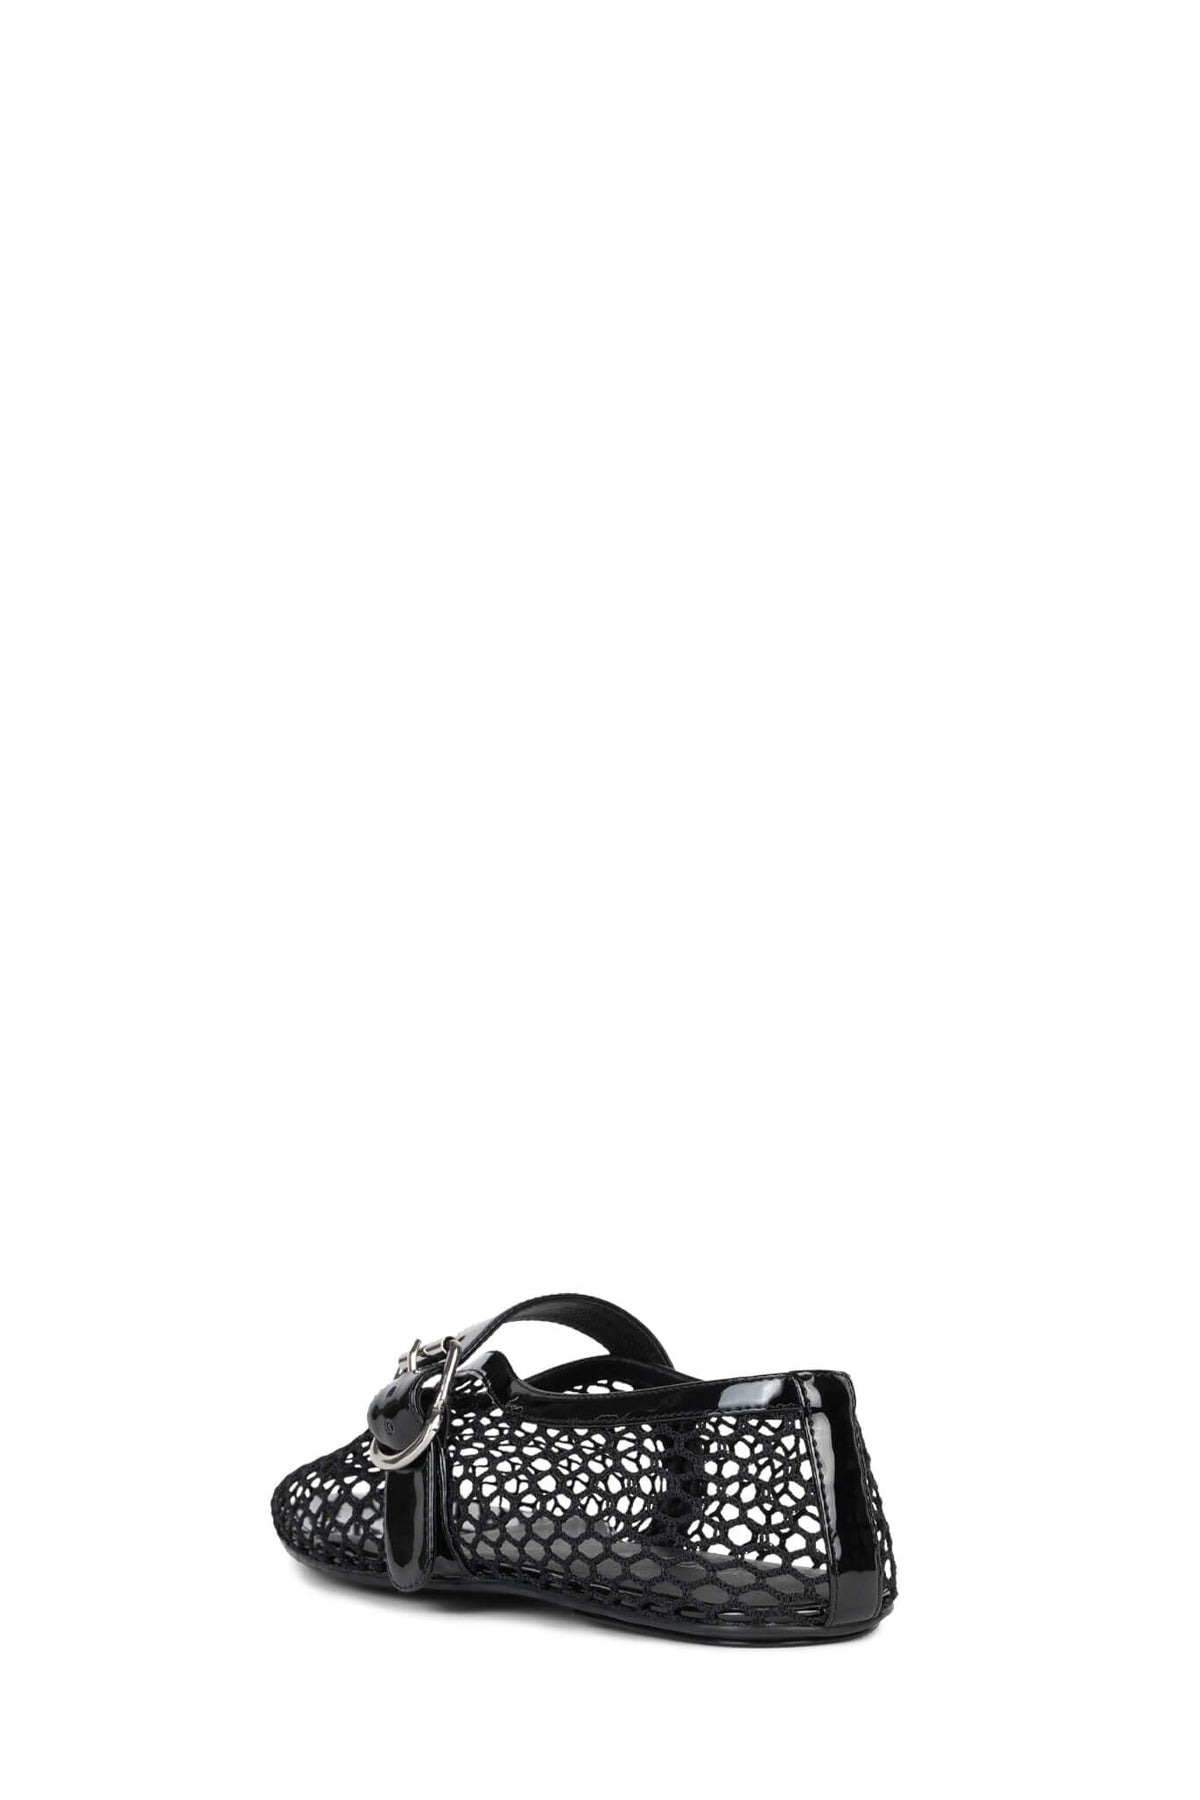 SHELLY-LS2 Mesh Mary-Jane Flast Jeffrey Campbell Black Patent Combo Back View